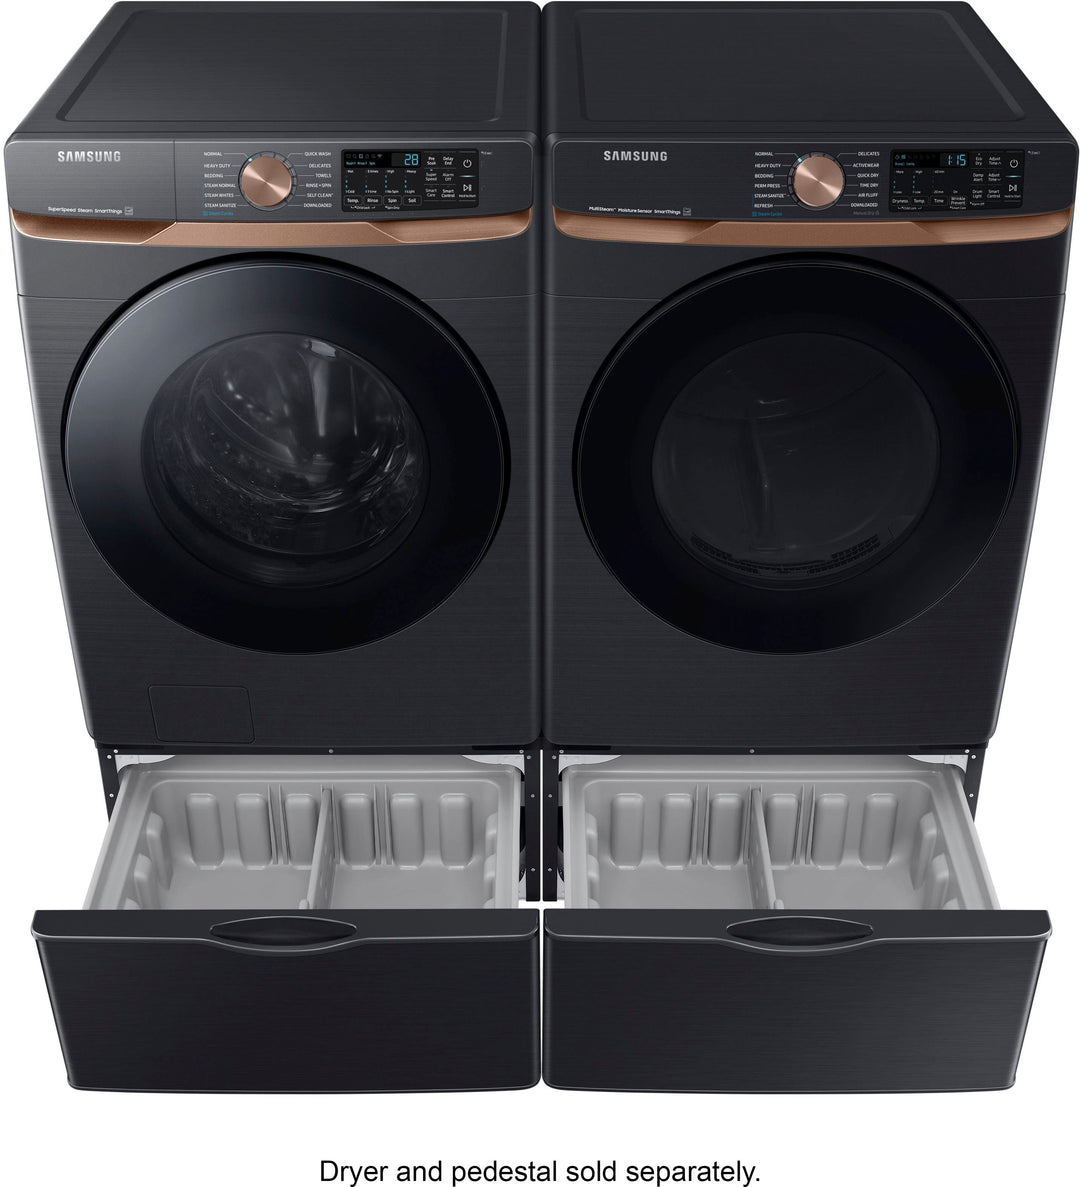 Samsung - 5.0 cu. ft. Extra Large Capacity Smart Front Load Washer with Super Speed Wash and Steam - Brushed black_1